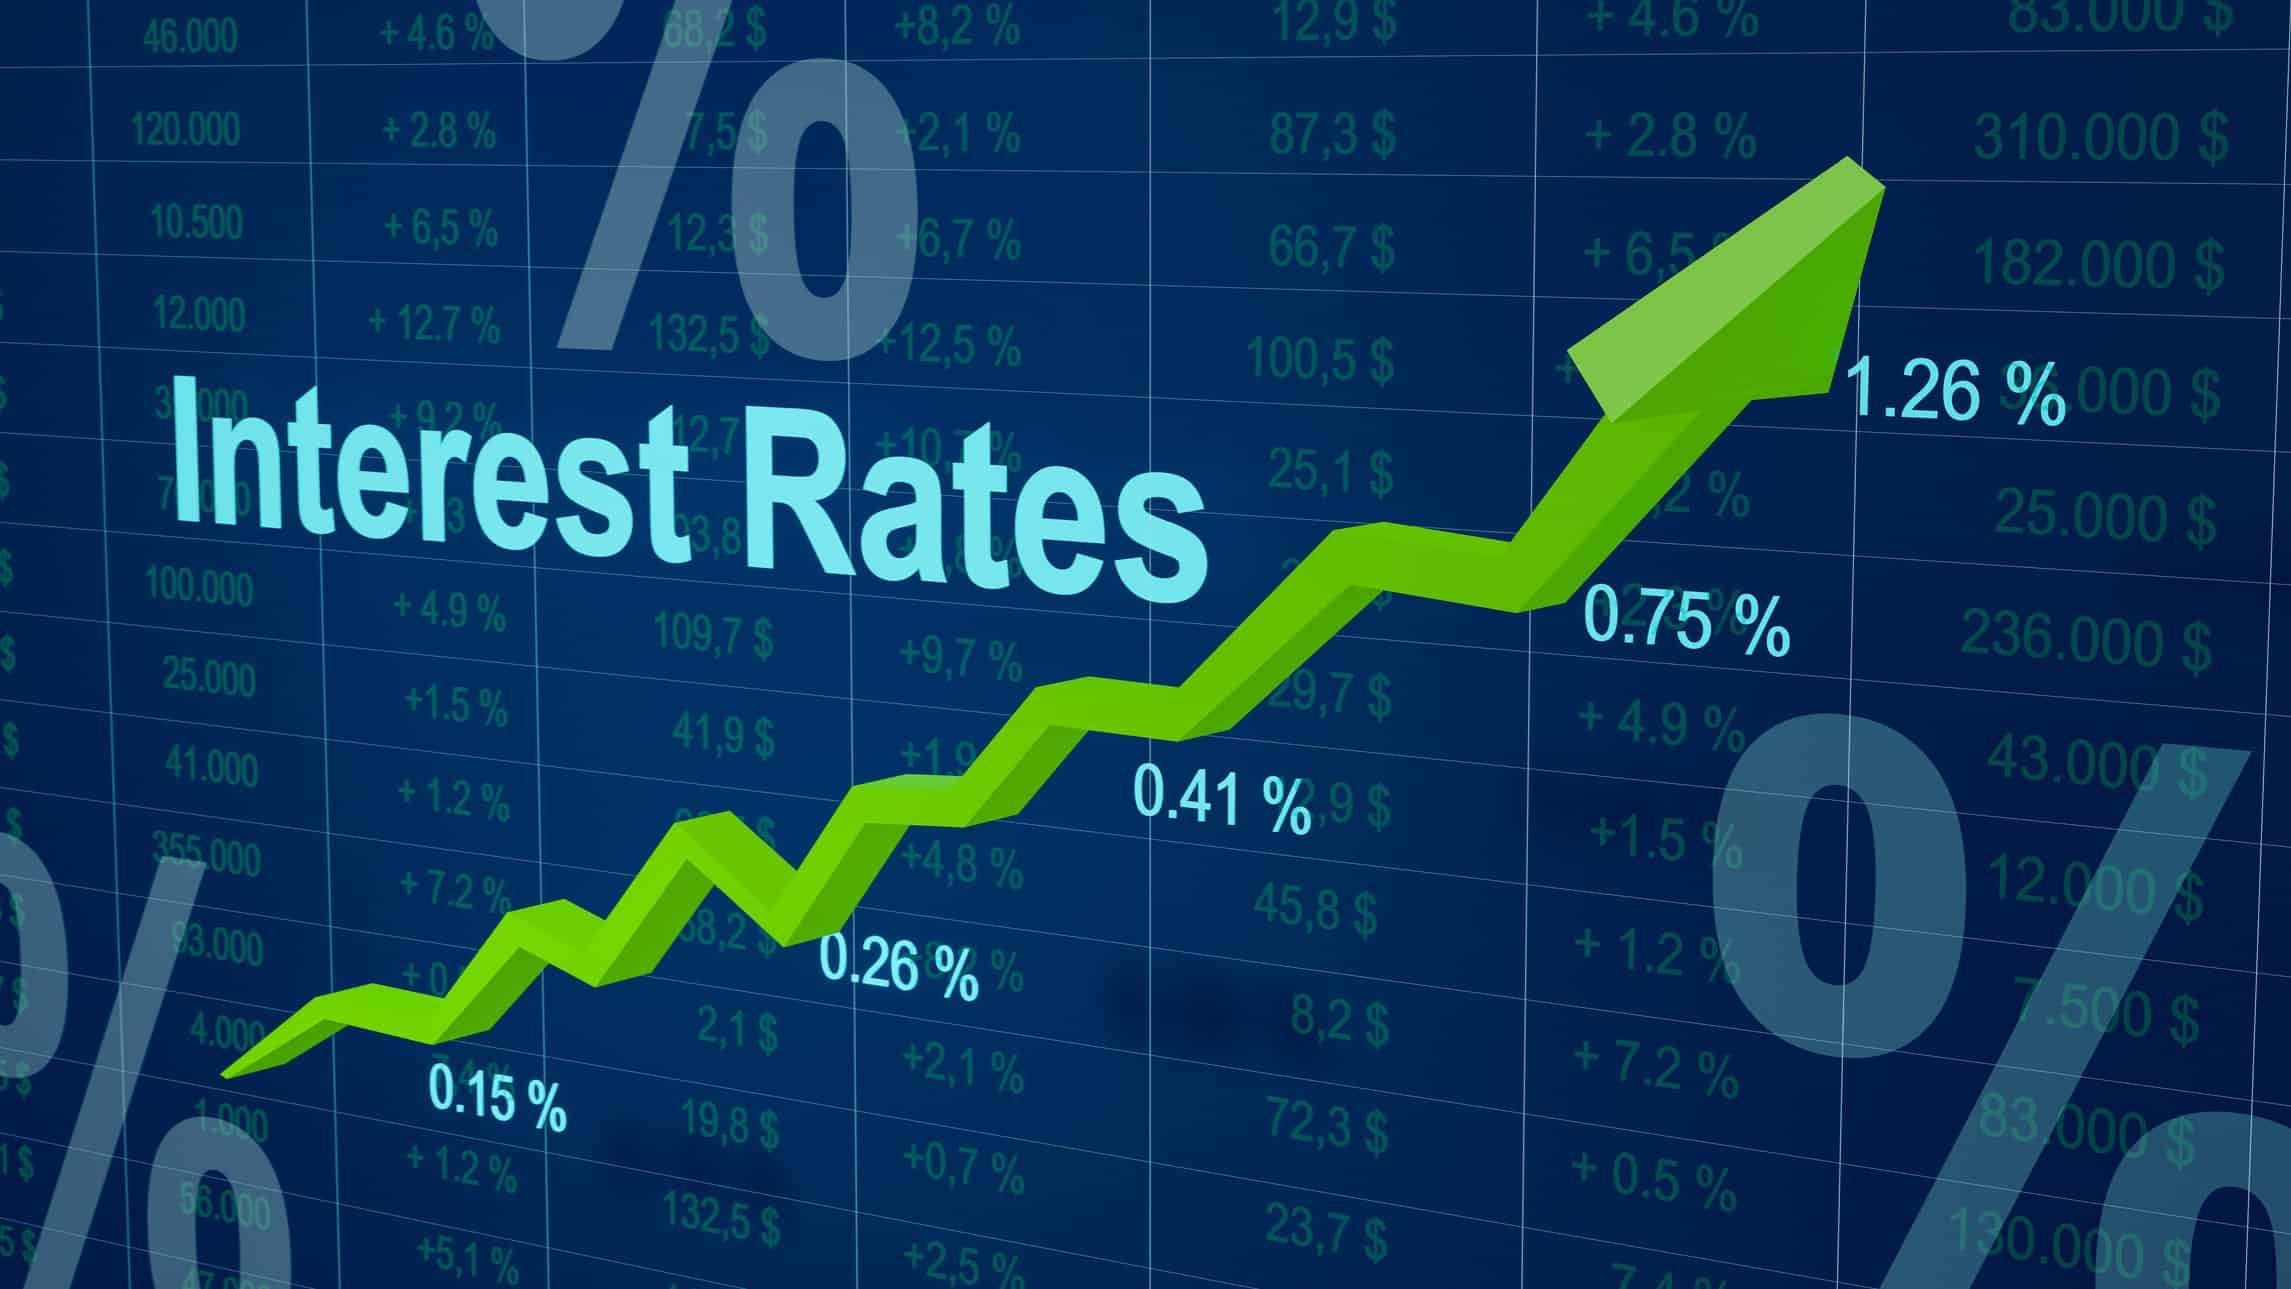 Australia’s interest rate future: When will the RBA cease rate hikes?